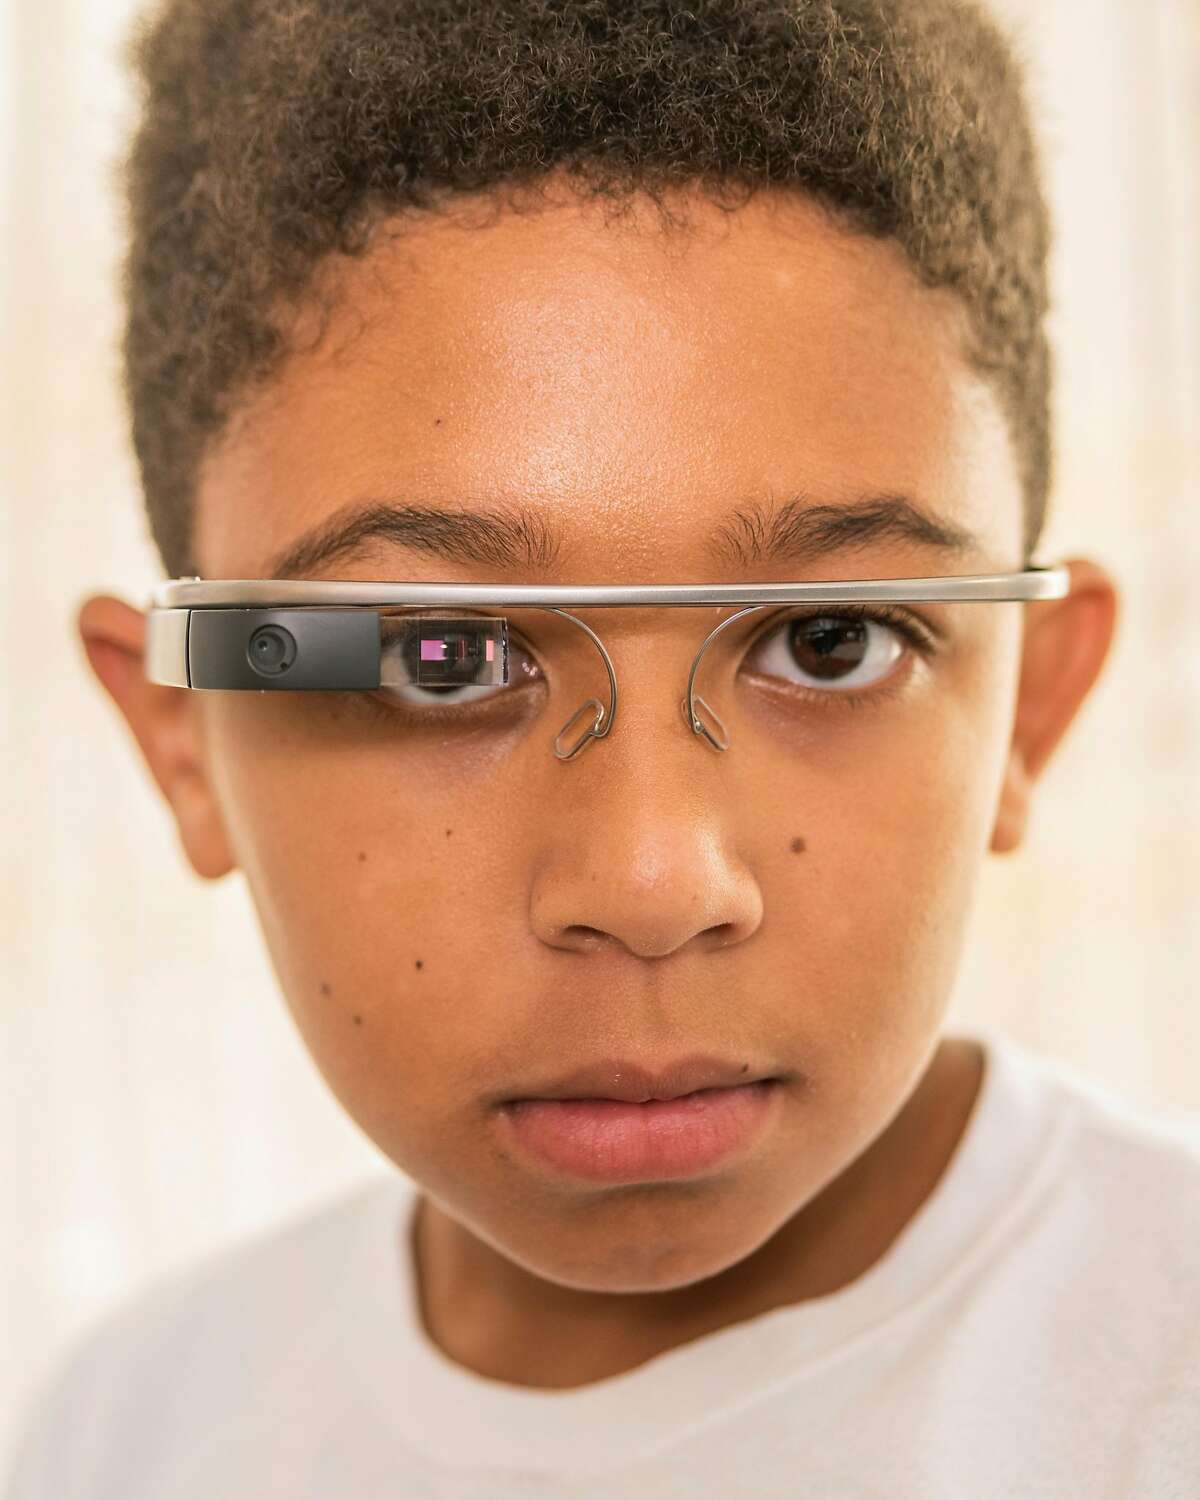 Esaïe Prickett, wearing Google Glass, at his home in Morgan Hill, Calif., July 10, 2019. Prickett, who has autism, tested an app on the computerized glasses in a clinical trial meant to help him learn how to recognize emotions and make eye contact with those around him. (Cayce Clifford/The New York Times)